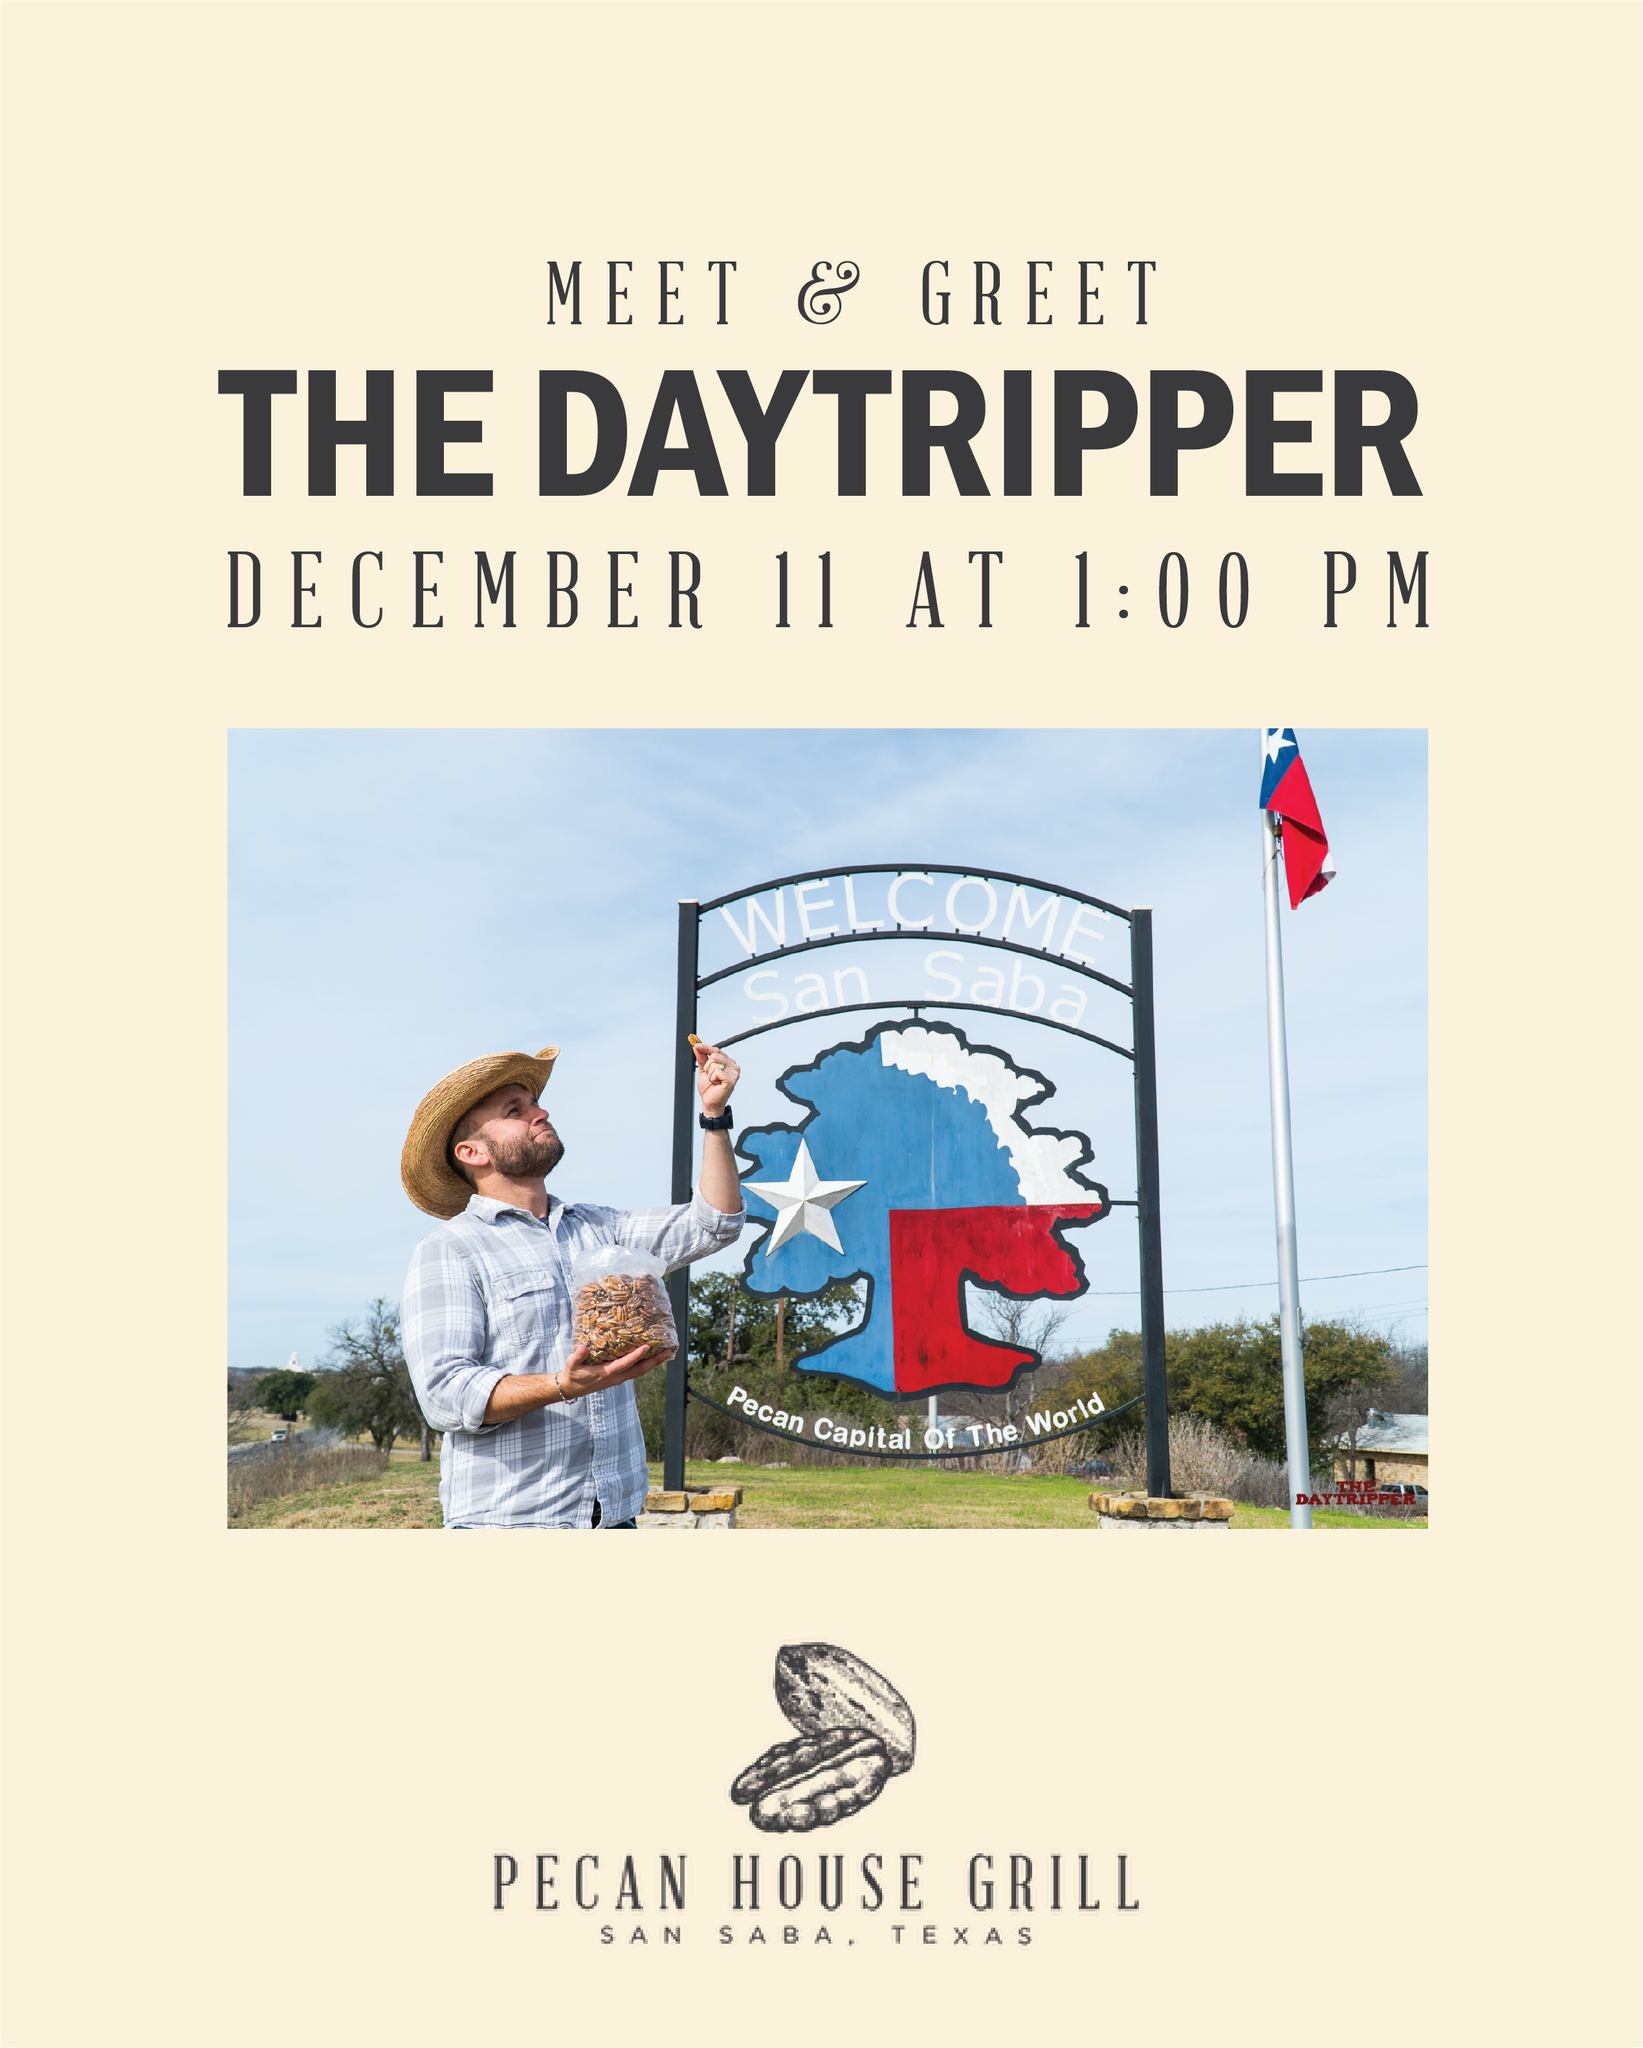 Pecan House Grill-The Daytripper Meet and Greet